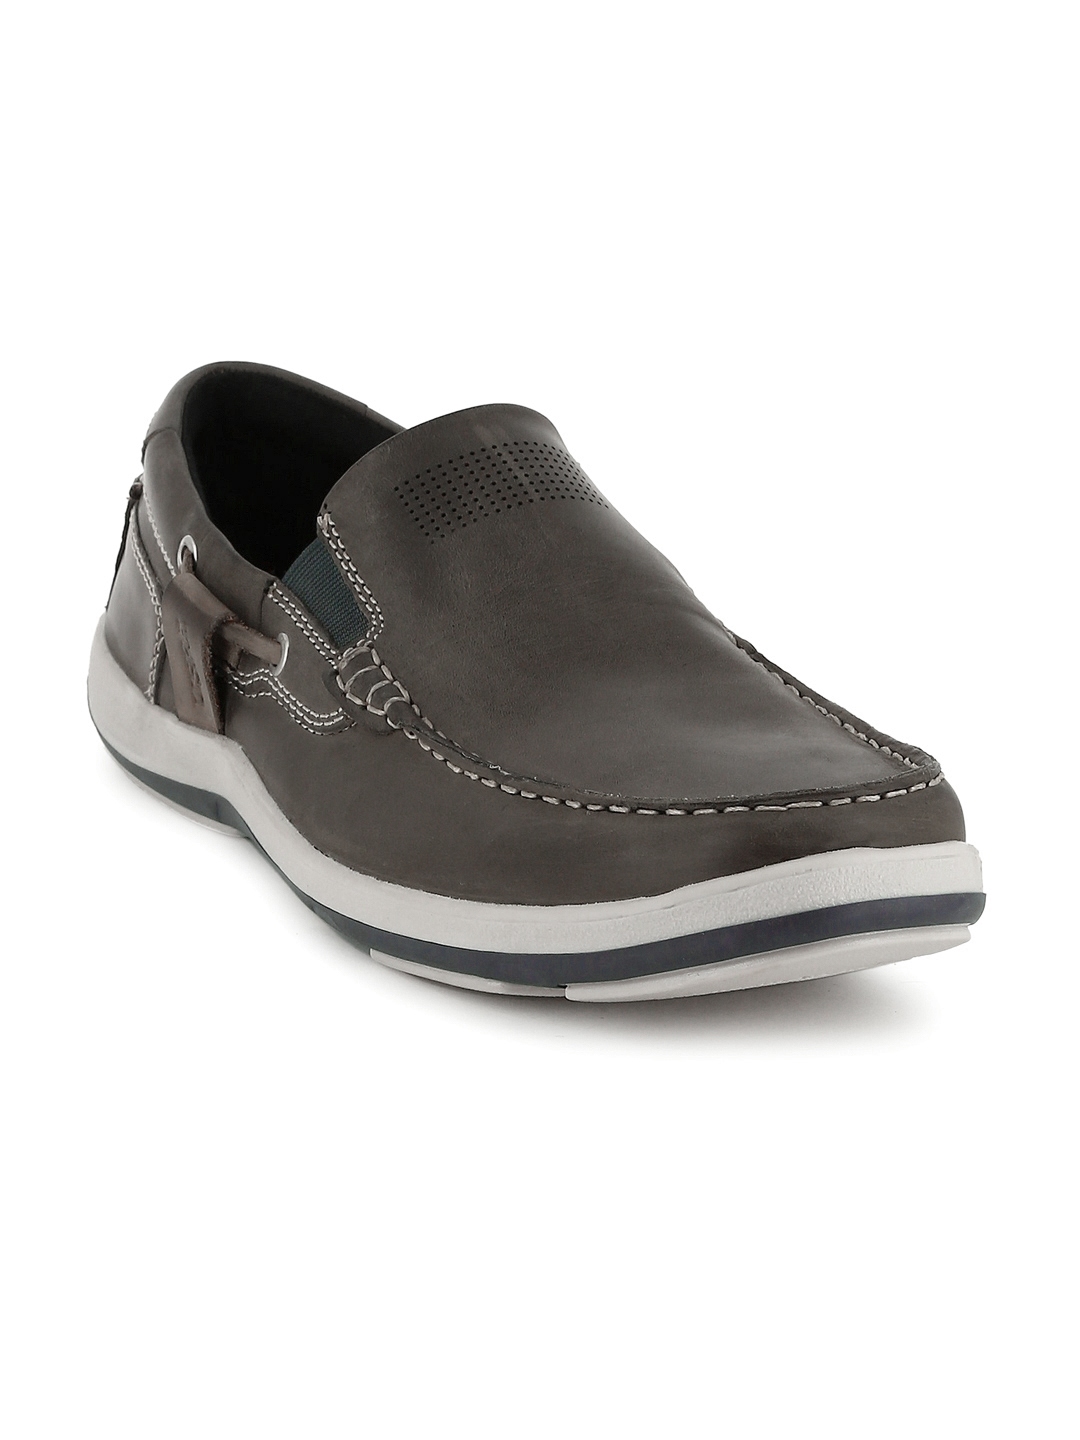 Buy U.S. Polo Assn. Men Charcoal Grey Leather Solid Slip On Sneakers ...